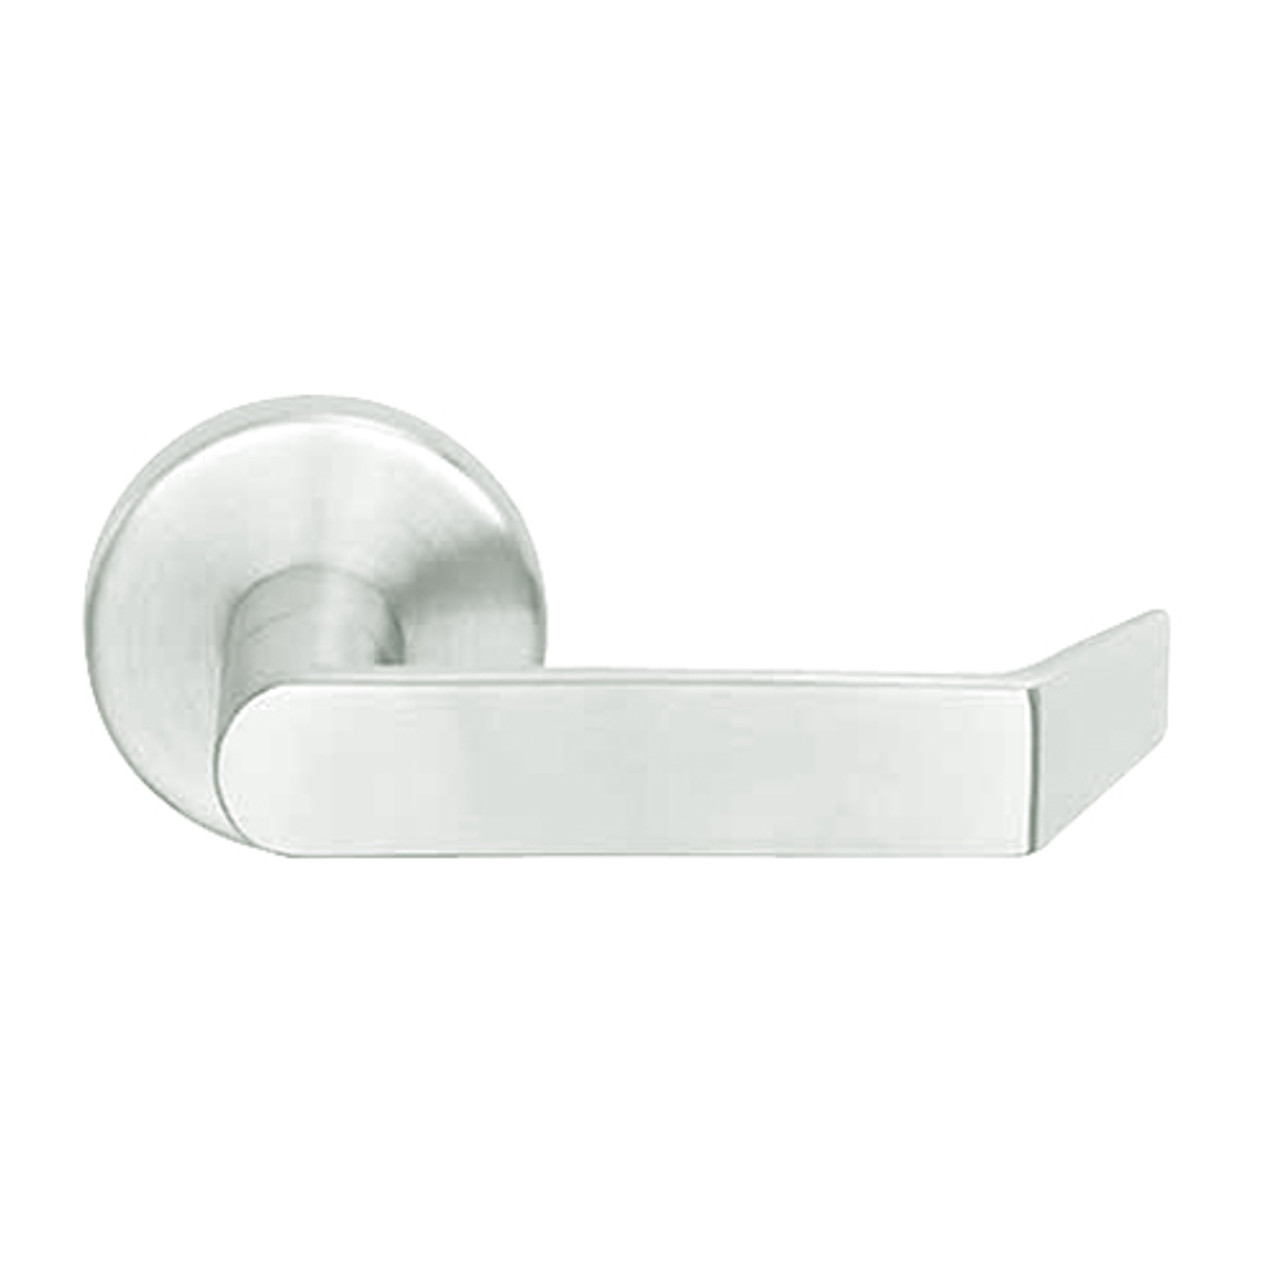 L9453L-06B-619 Schlage L Series Less Cylinder Entrance with Deadbolt Commercial Mortise Lock with 06 Cast Lever Design in Satin Nickel